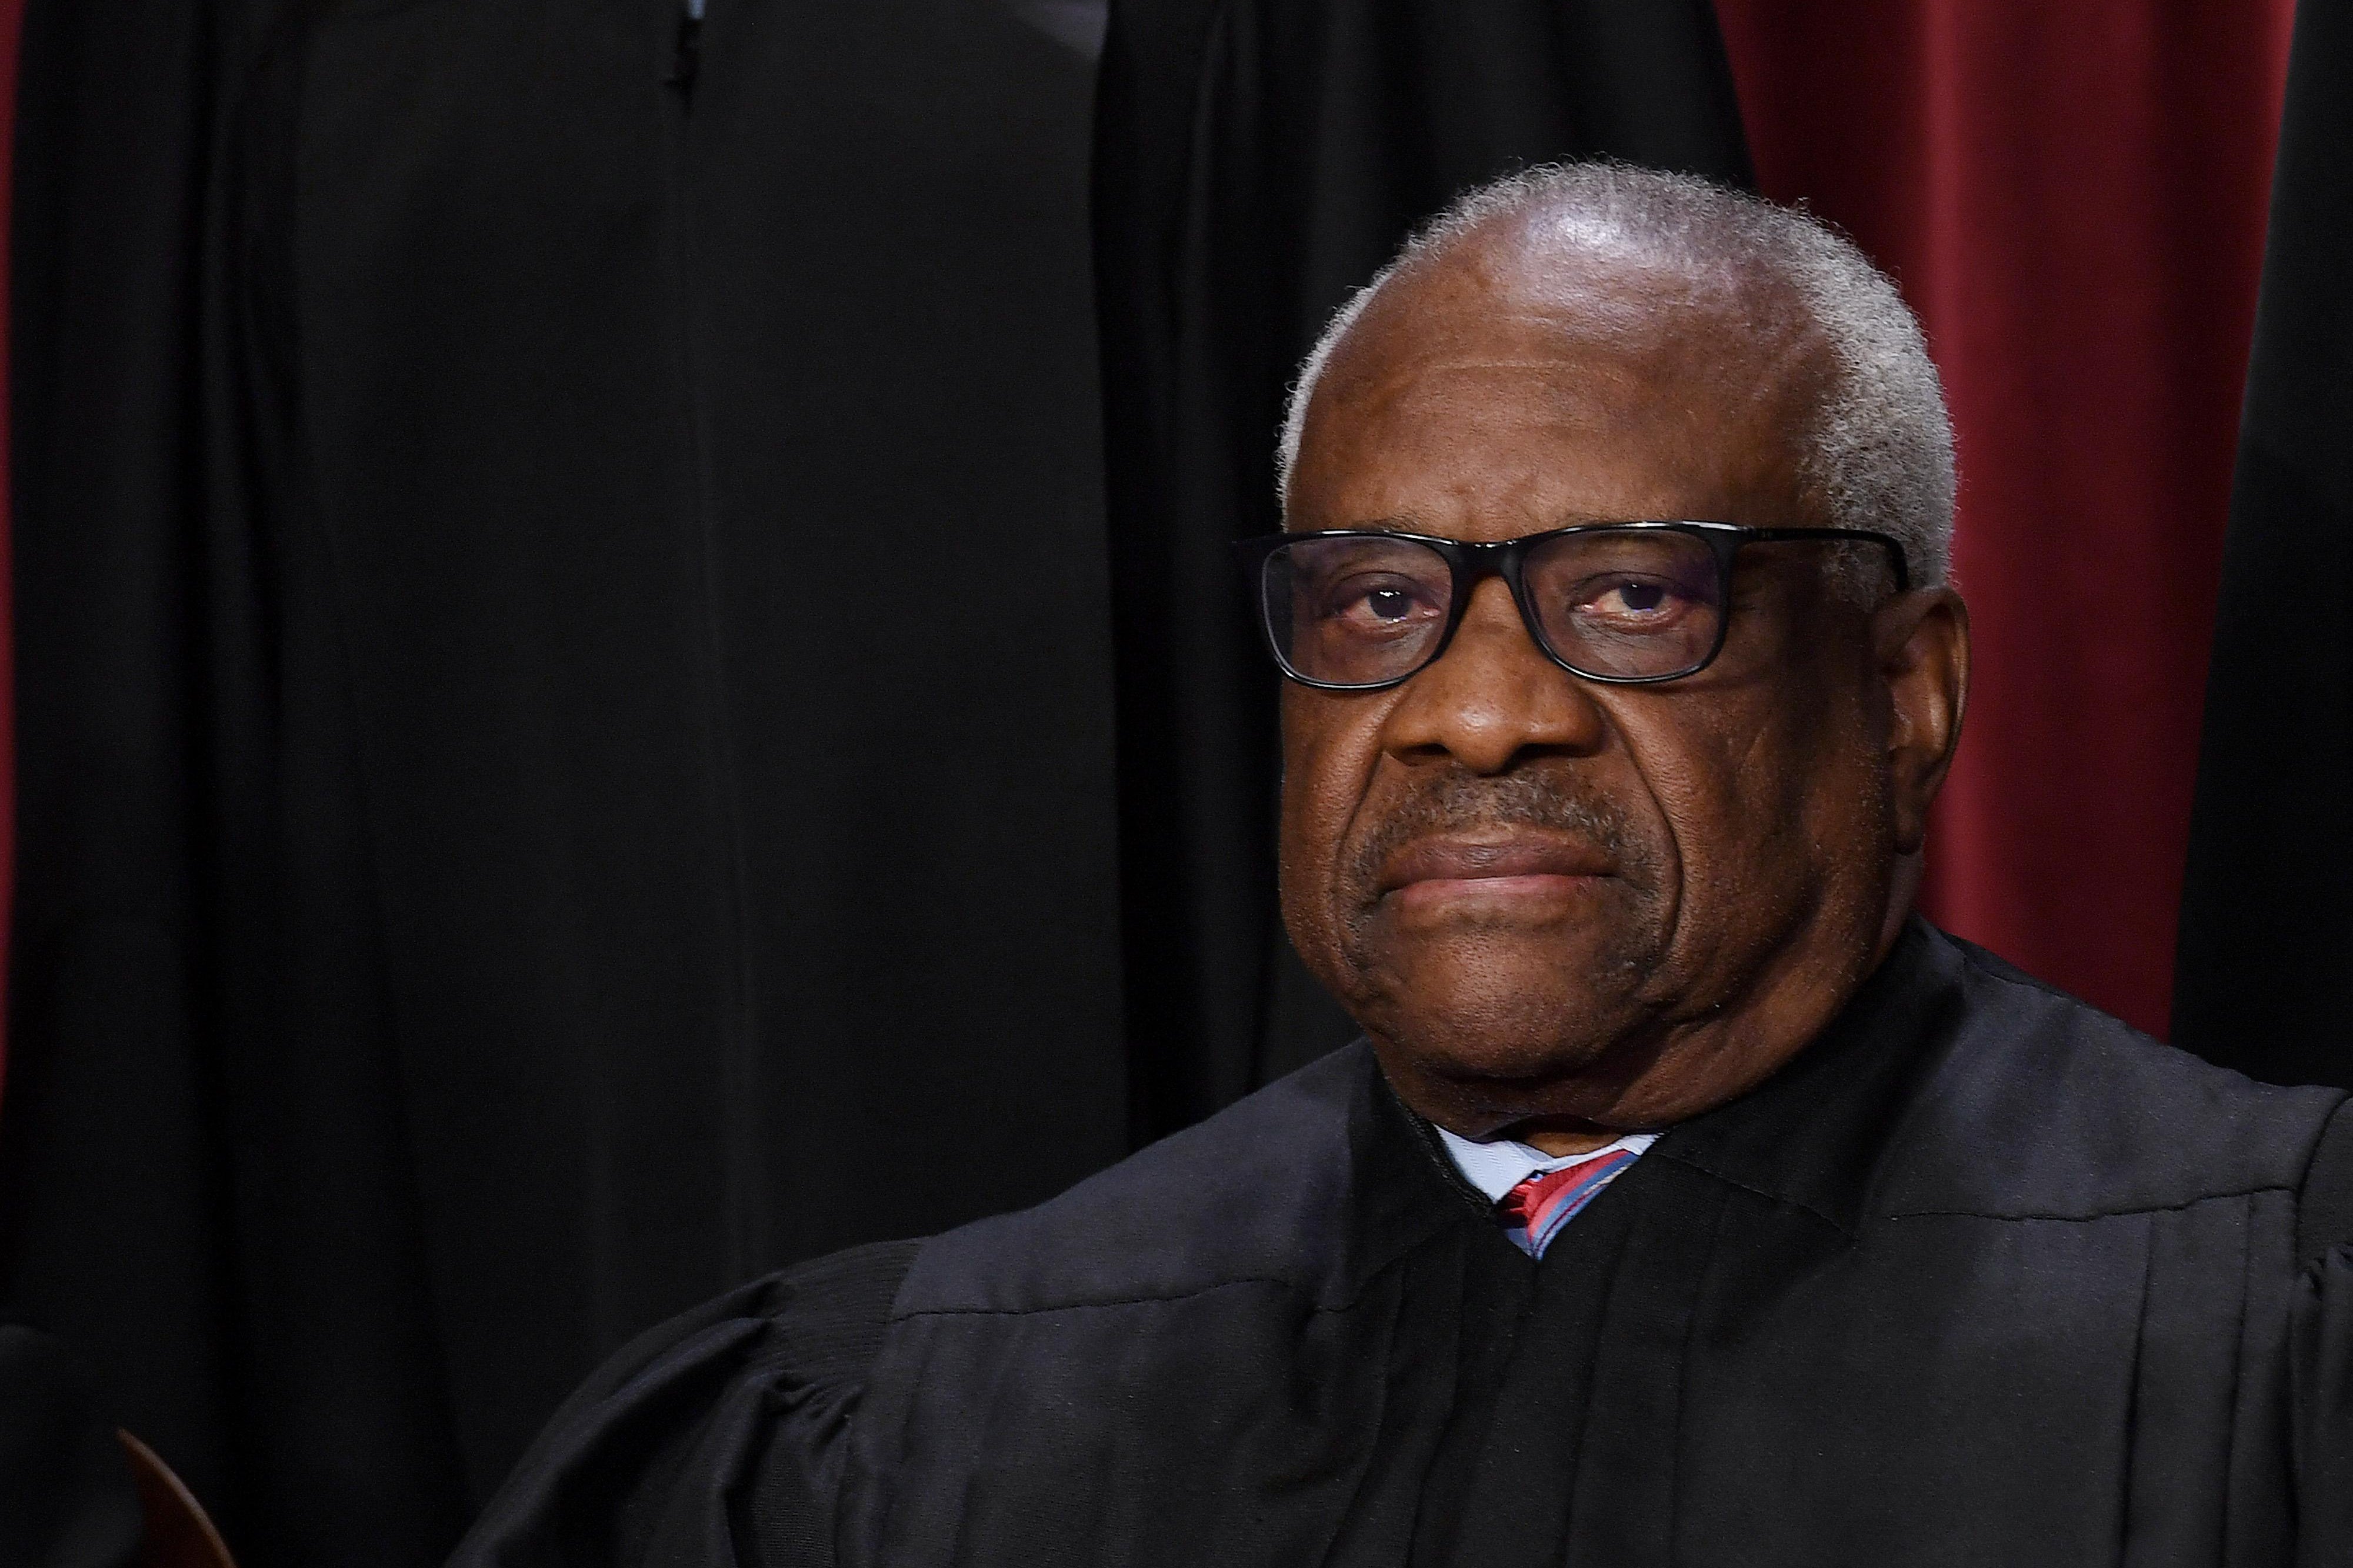 Thomas, at the Supreme Court, looks sternly ahead.